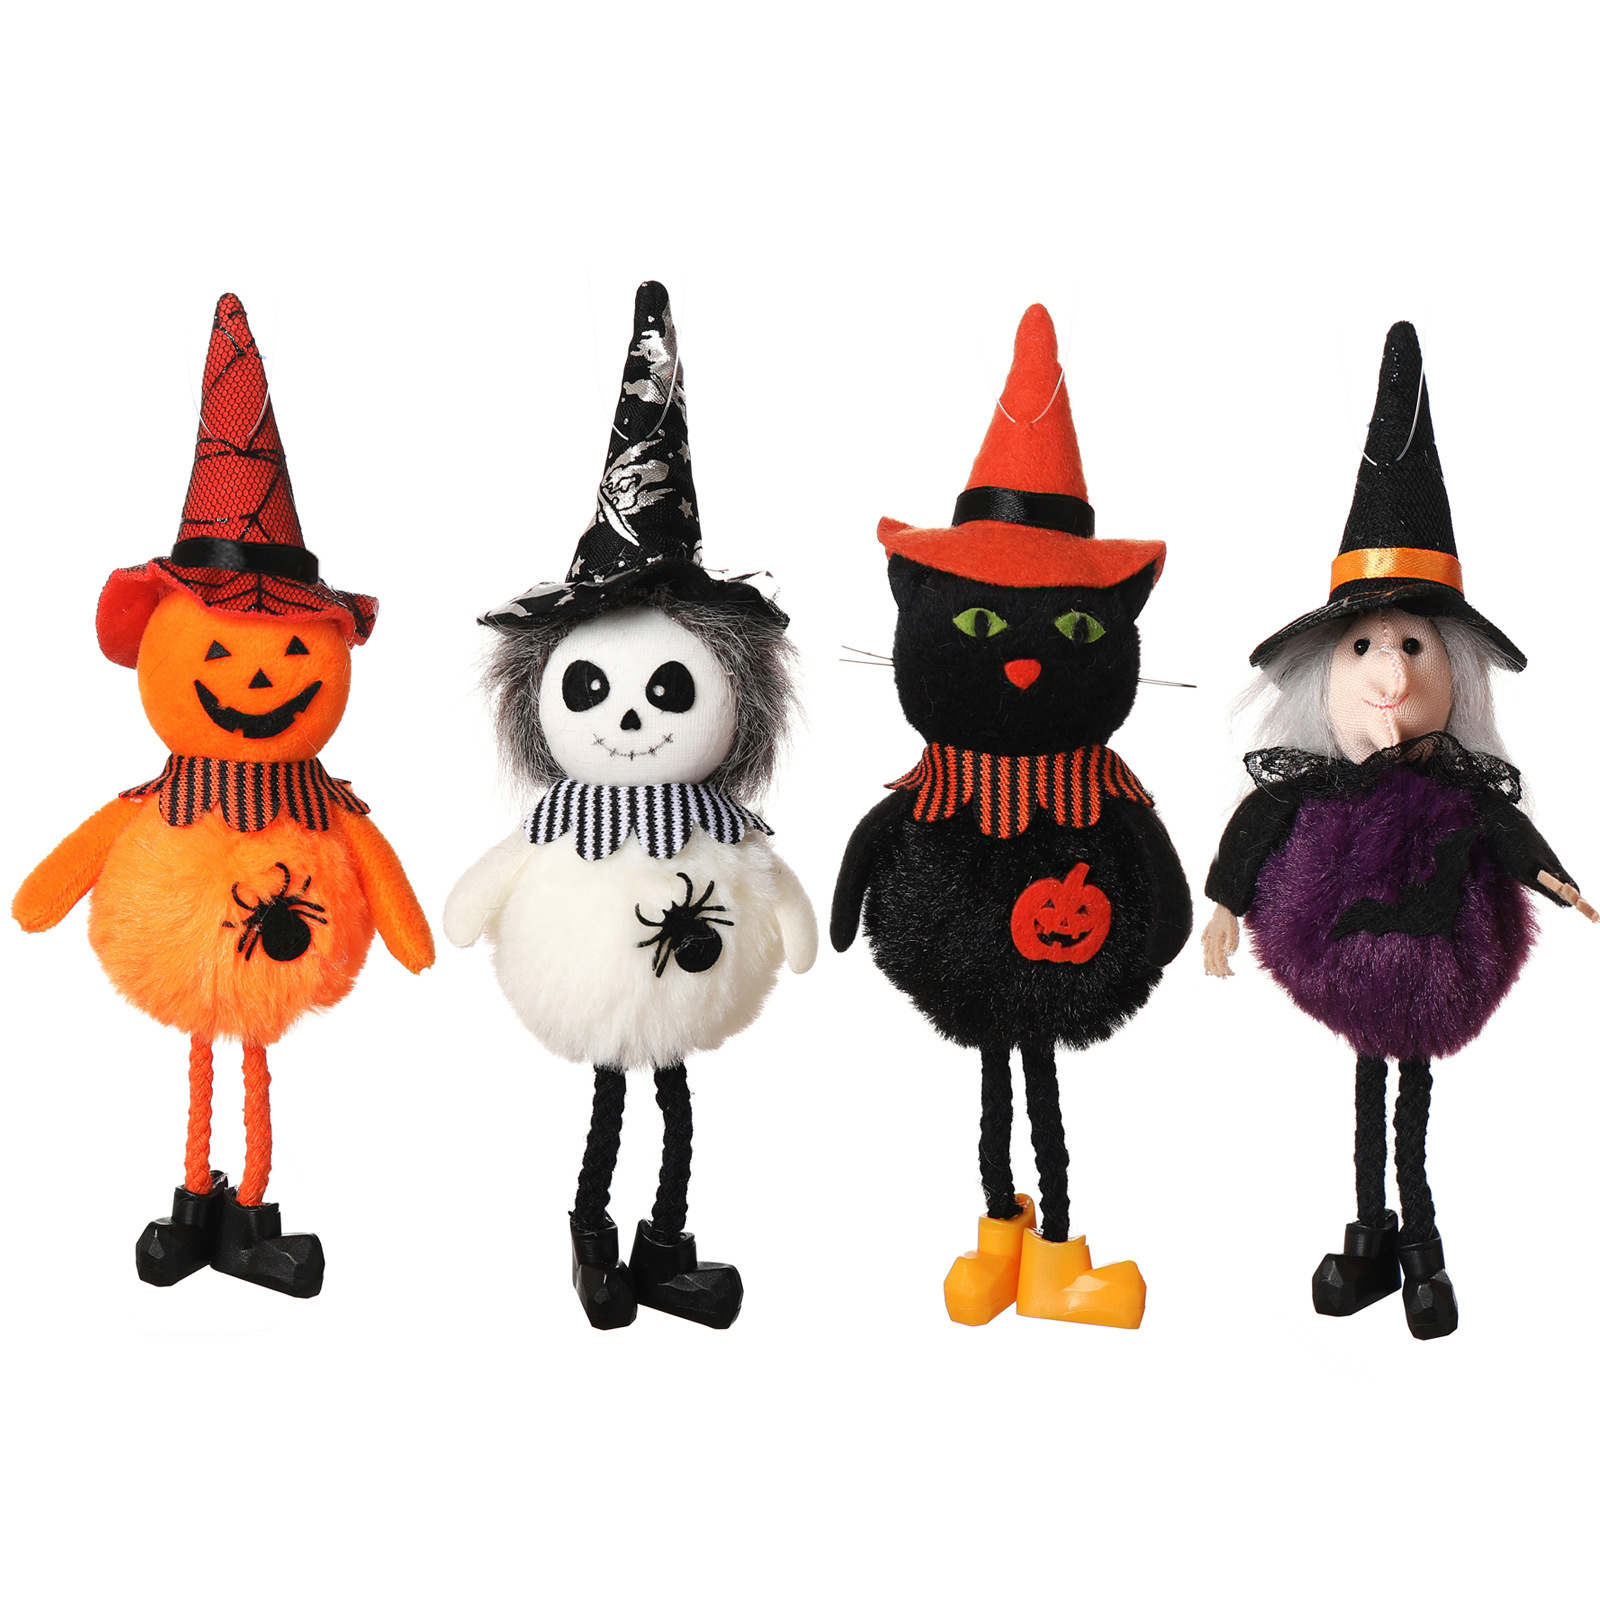 

Halloween Decoration Hanging Garden Fancy Plush Toy Pumpkin Witch Black Cat Ghost With Spider Round Belly Hat Stuff Table Ornament Party Bar Decor